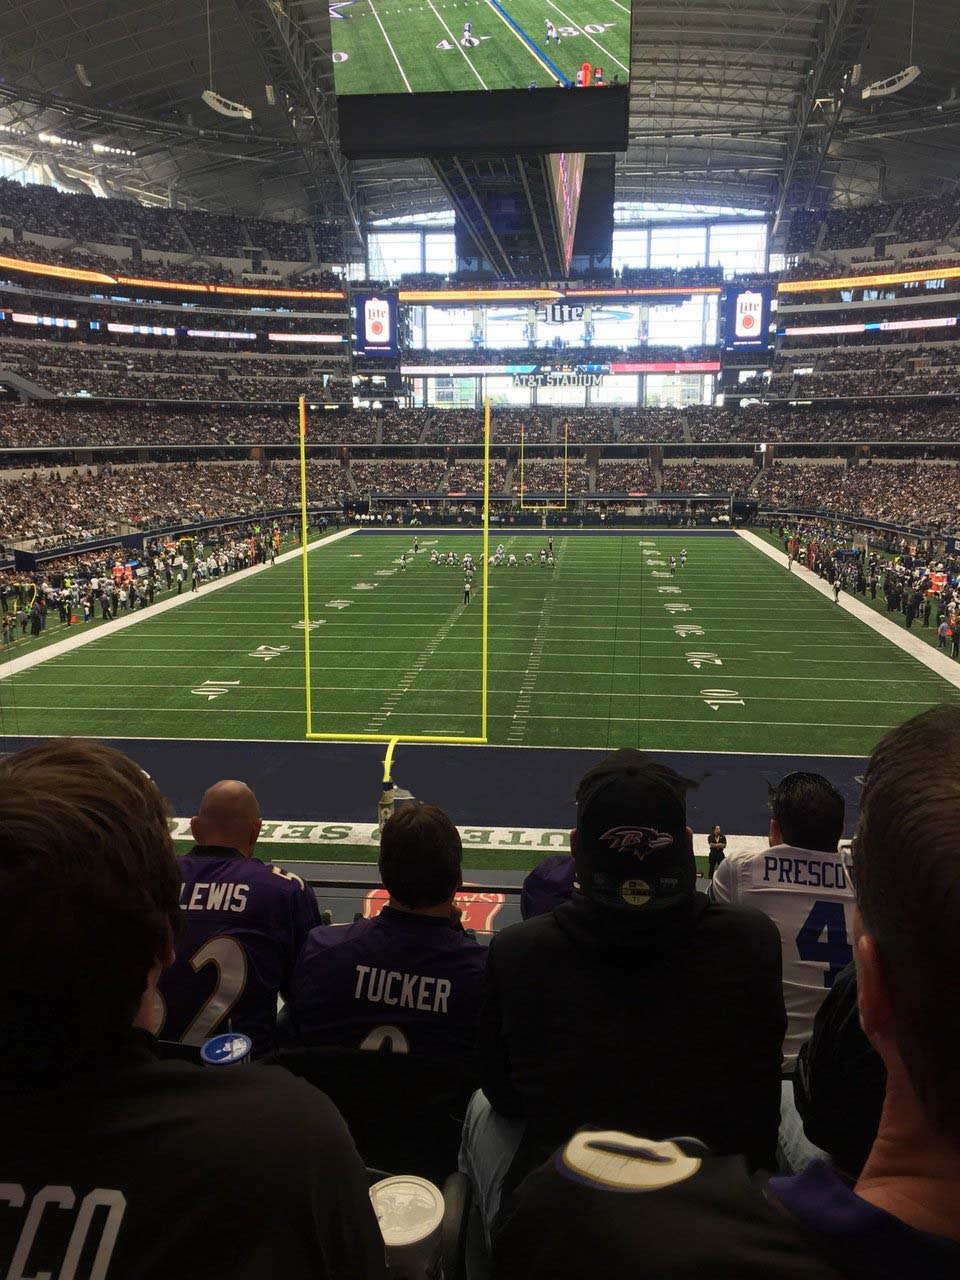 section 246, row 4 seat view  for football - at&t stadium (cowboys stadium)